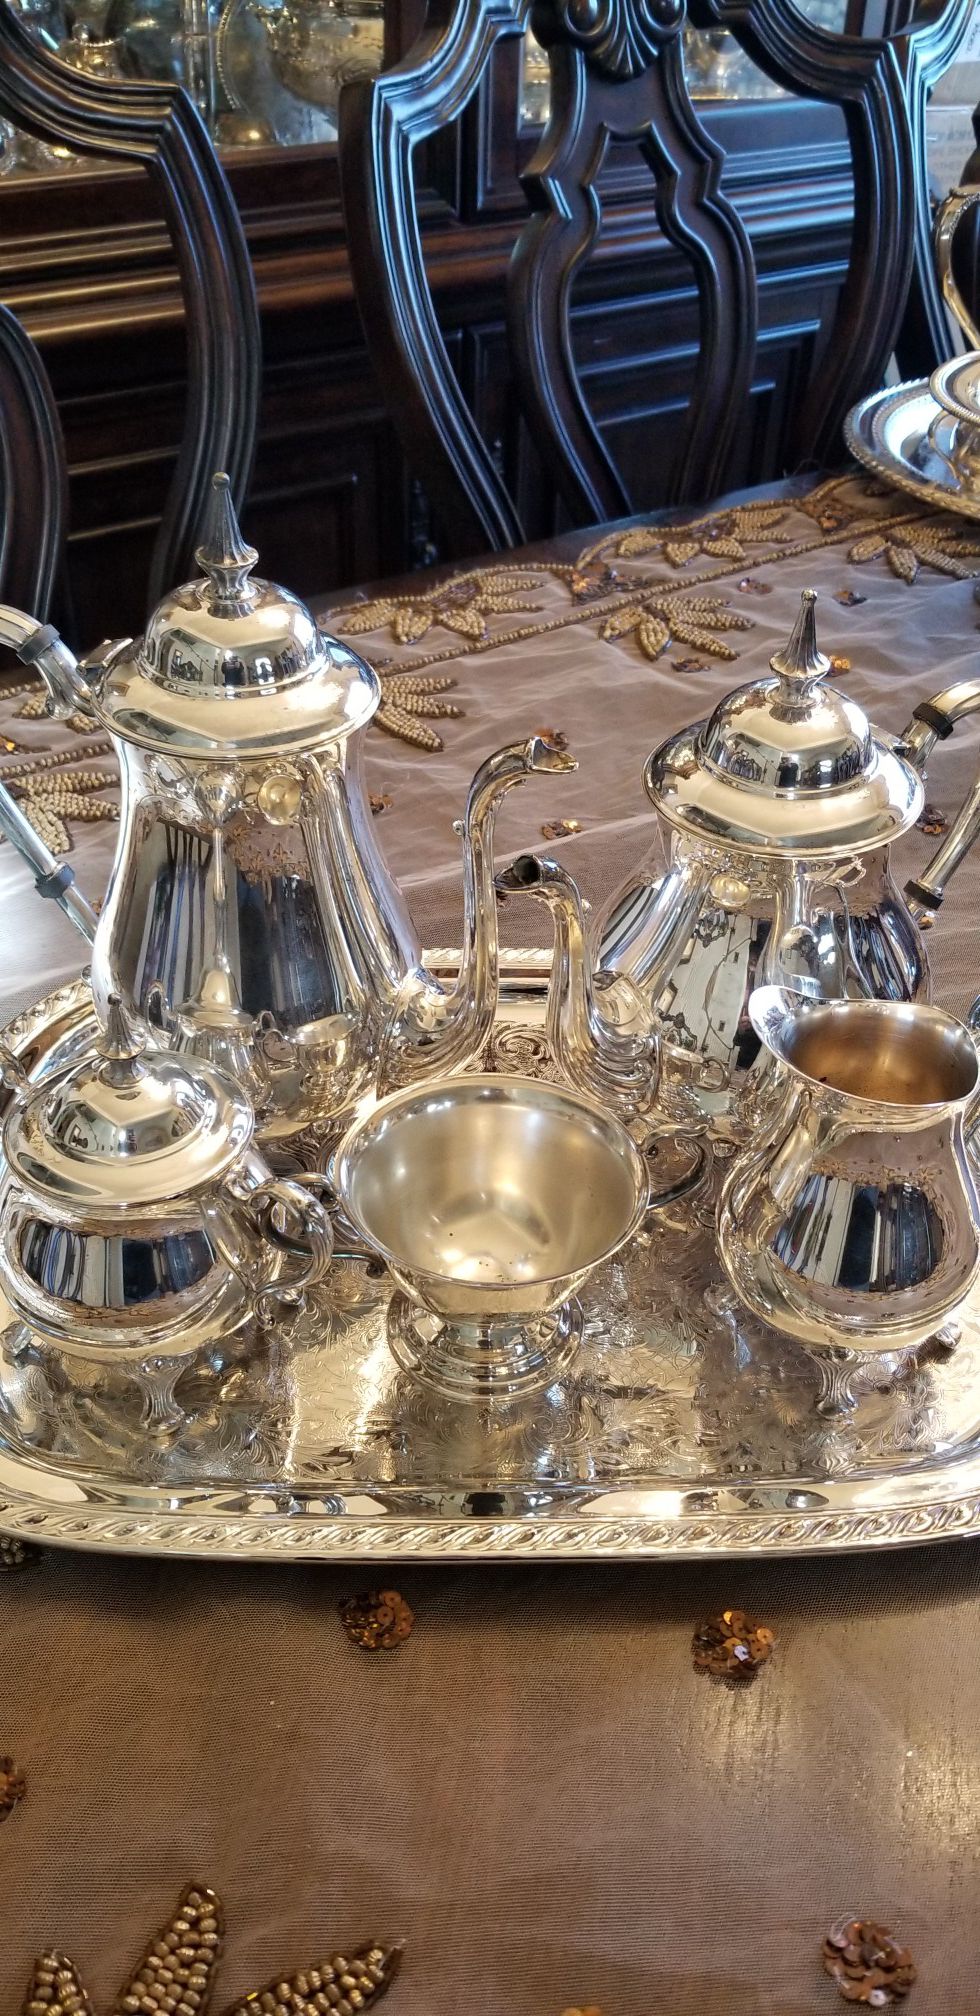 Silverplated tea and coffee set with edge decorated tray